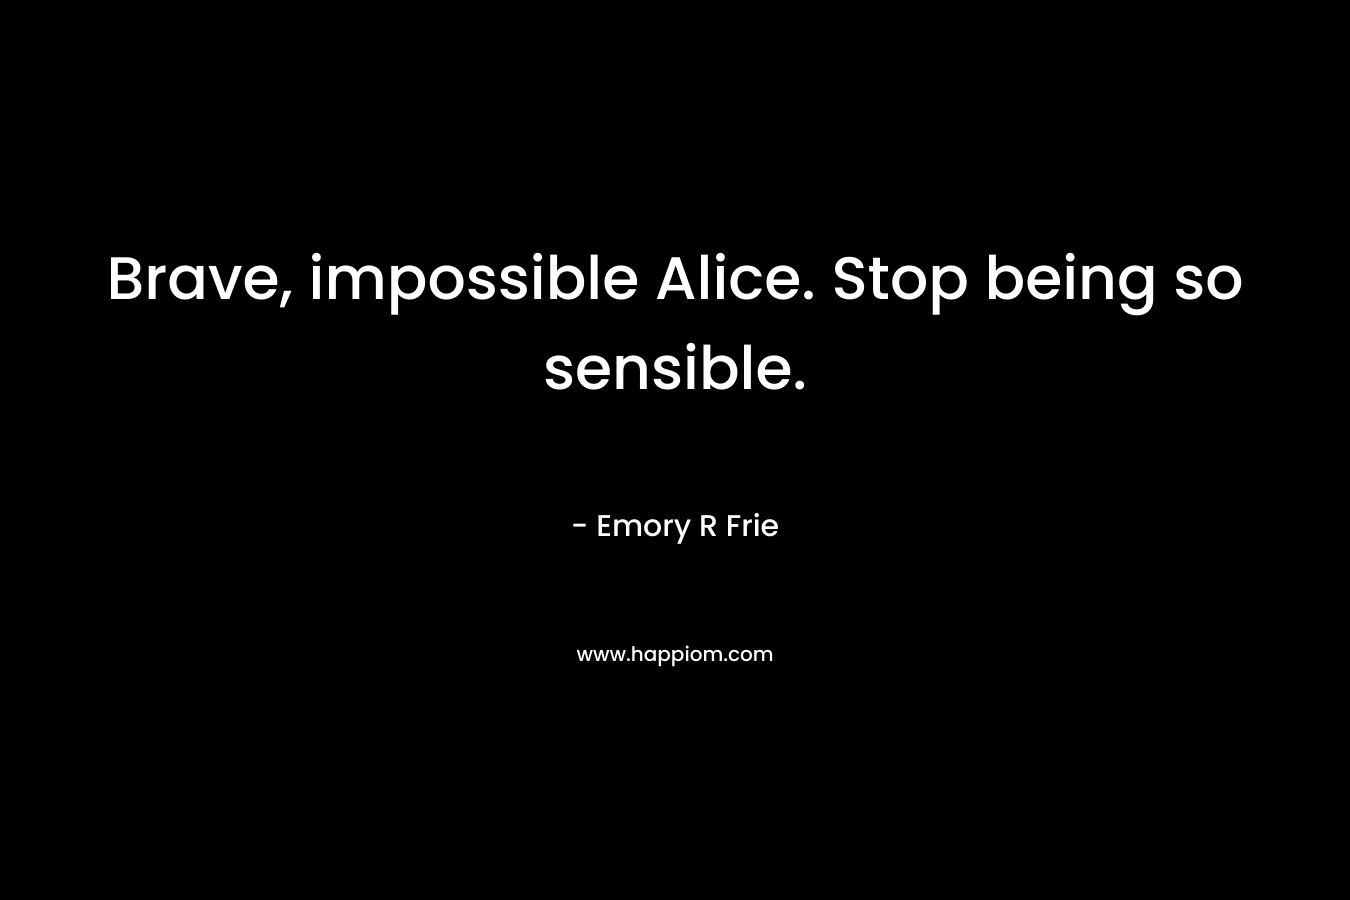 Brave, impossible Alice. Stop being so sensible. – Emory R Frie